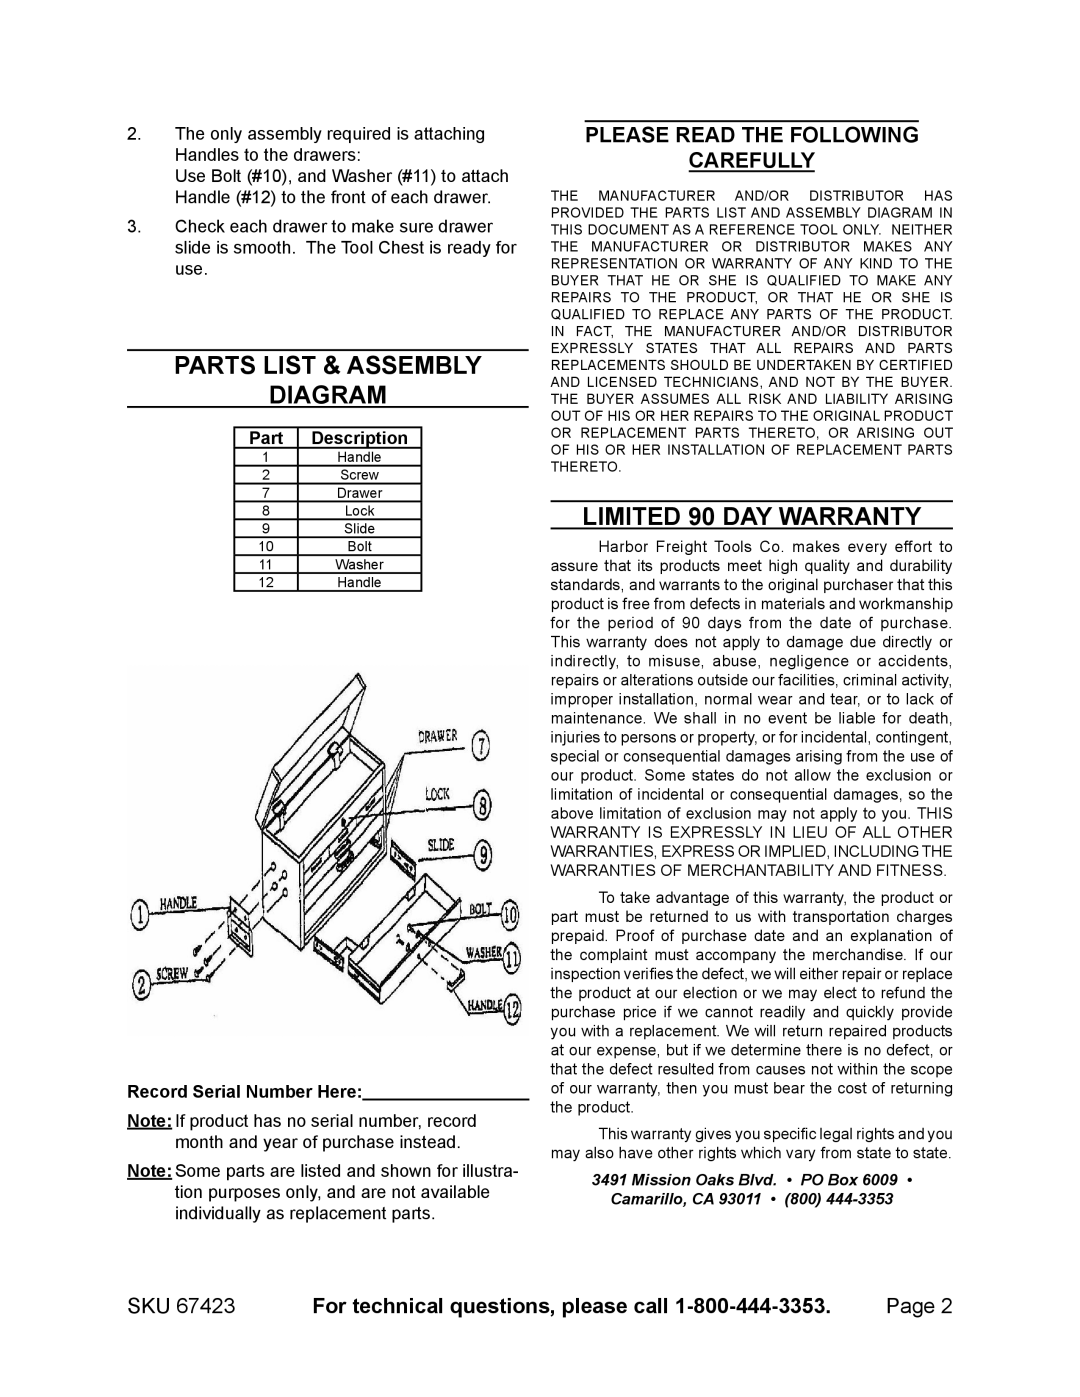 Harbor Freight Tools 67423 Parts List & Assembly diagram, LIMITED 90 DAY WARRANTY, Please Read The Following Carefully 